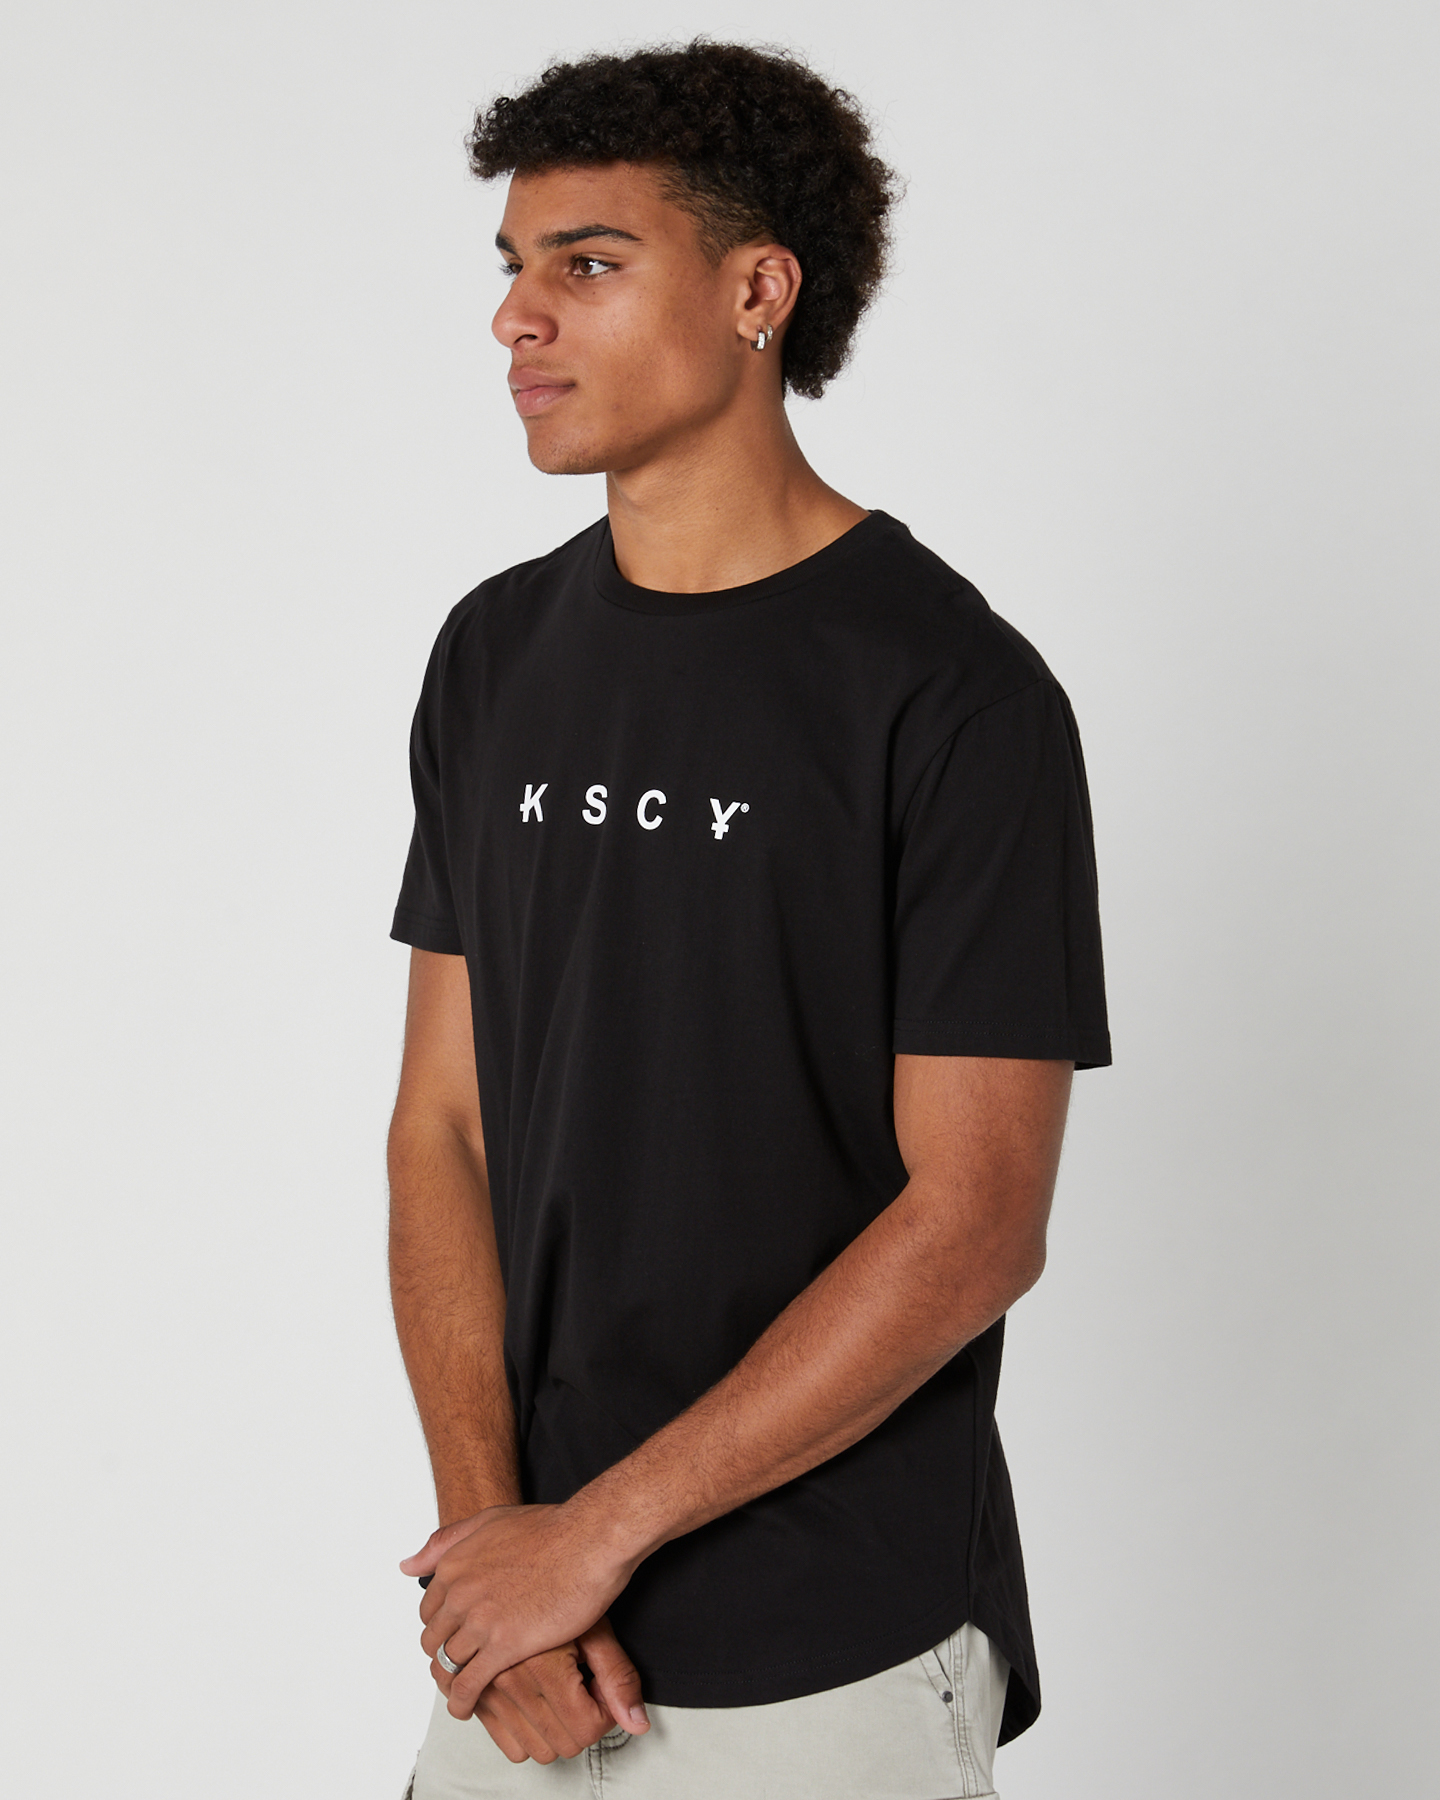 Kiss Chacey Zomp Dual Curved Tee - Jet Black | SurfStitch